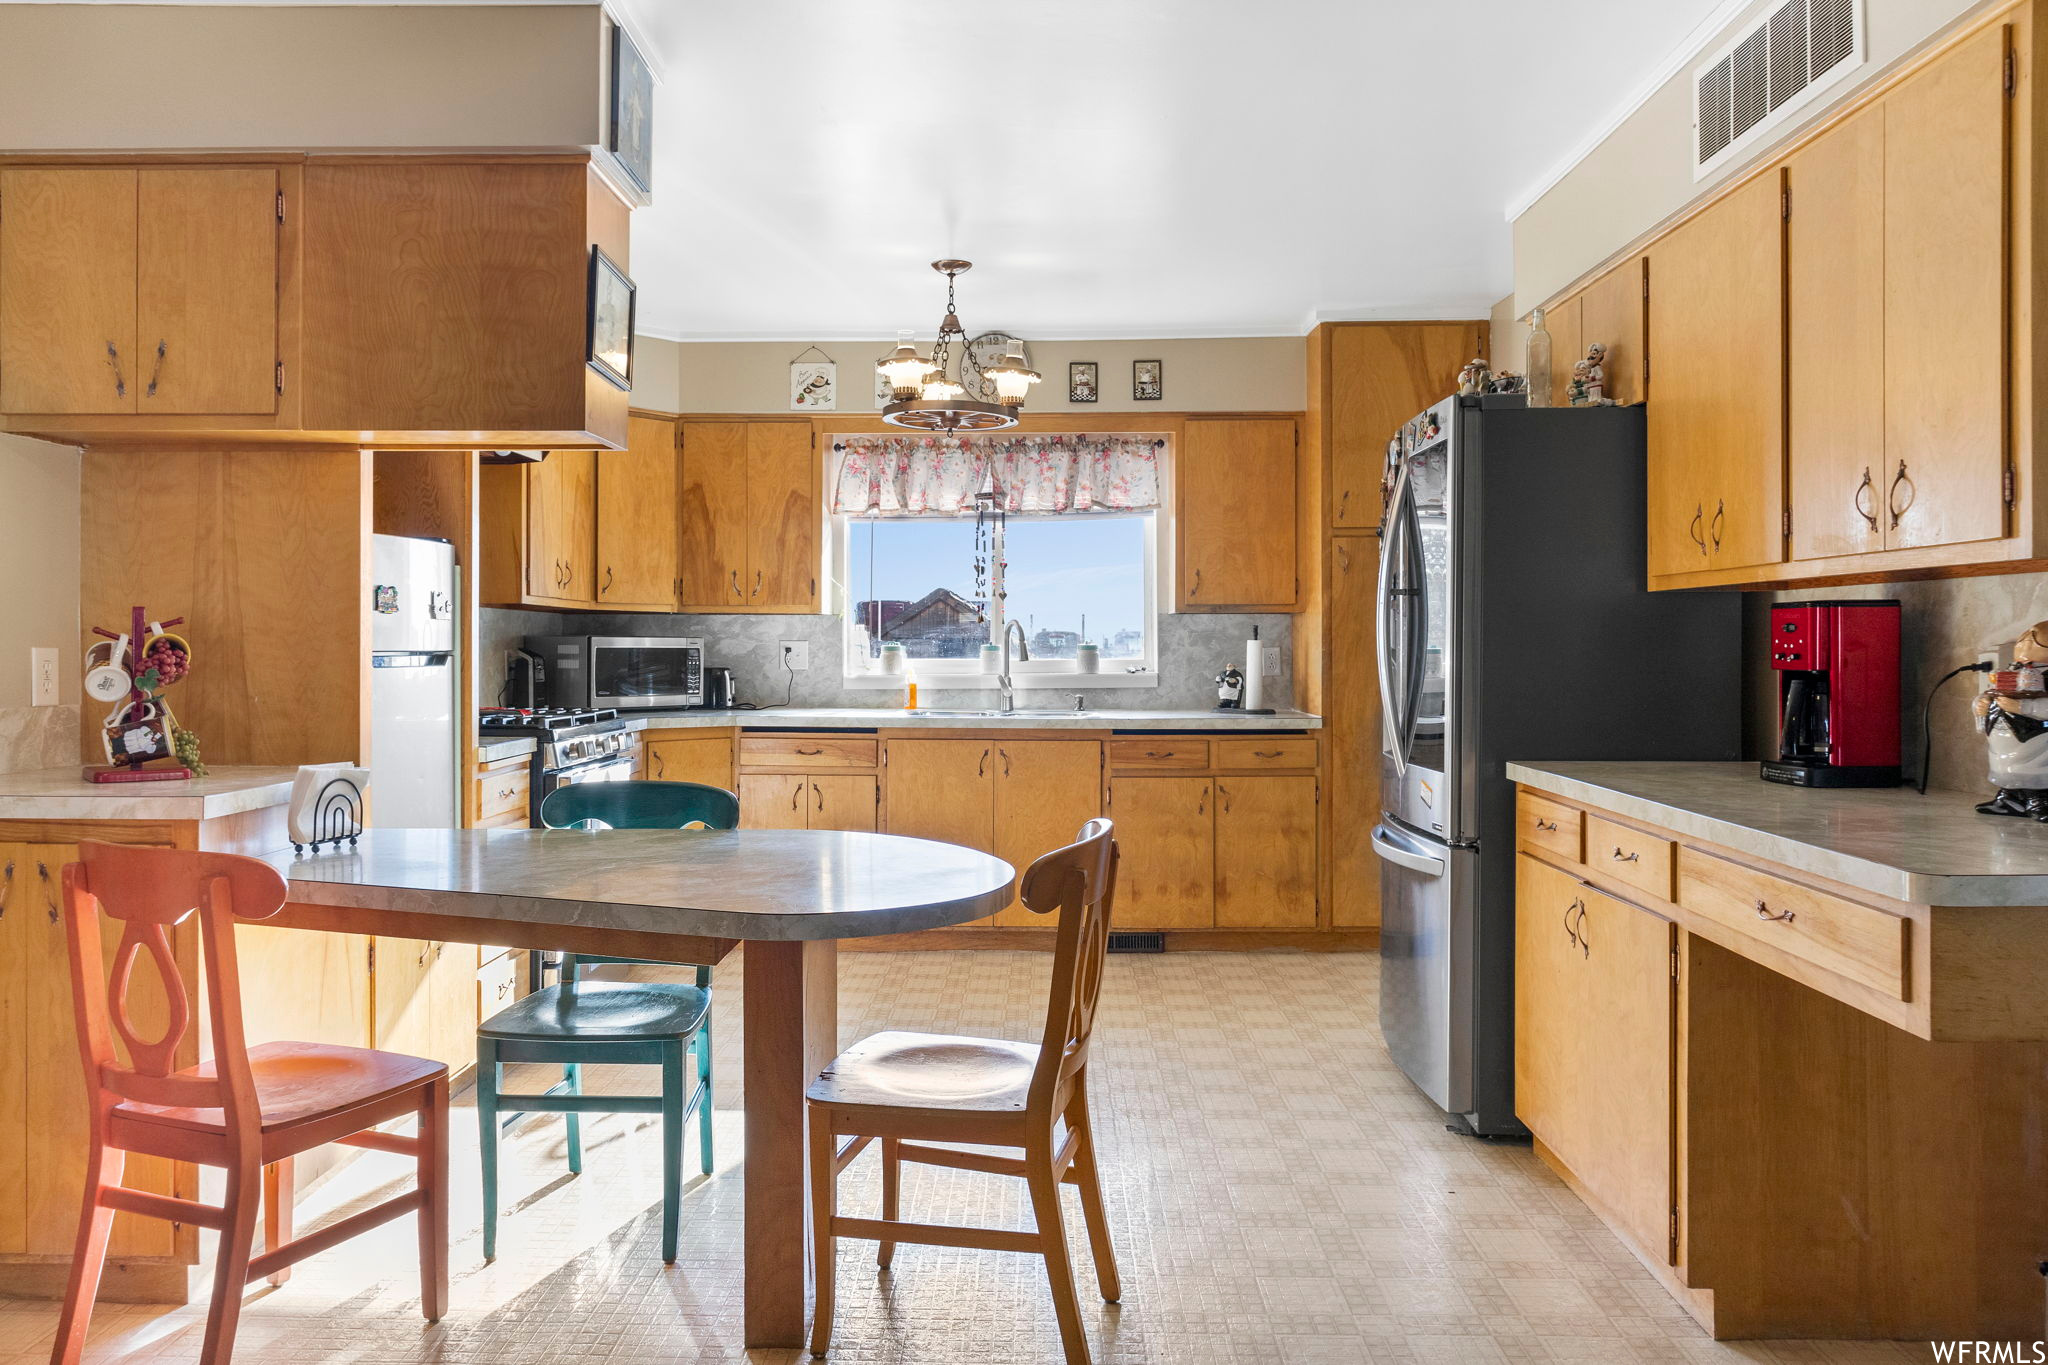 Kitchen featuring stacked washer and dryer, appliances with stainless steel finishes, brown cabinets, light countertops, and backsplash